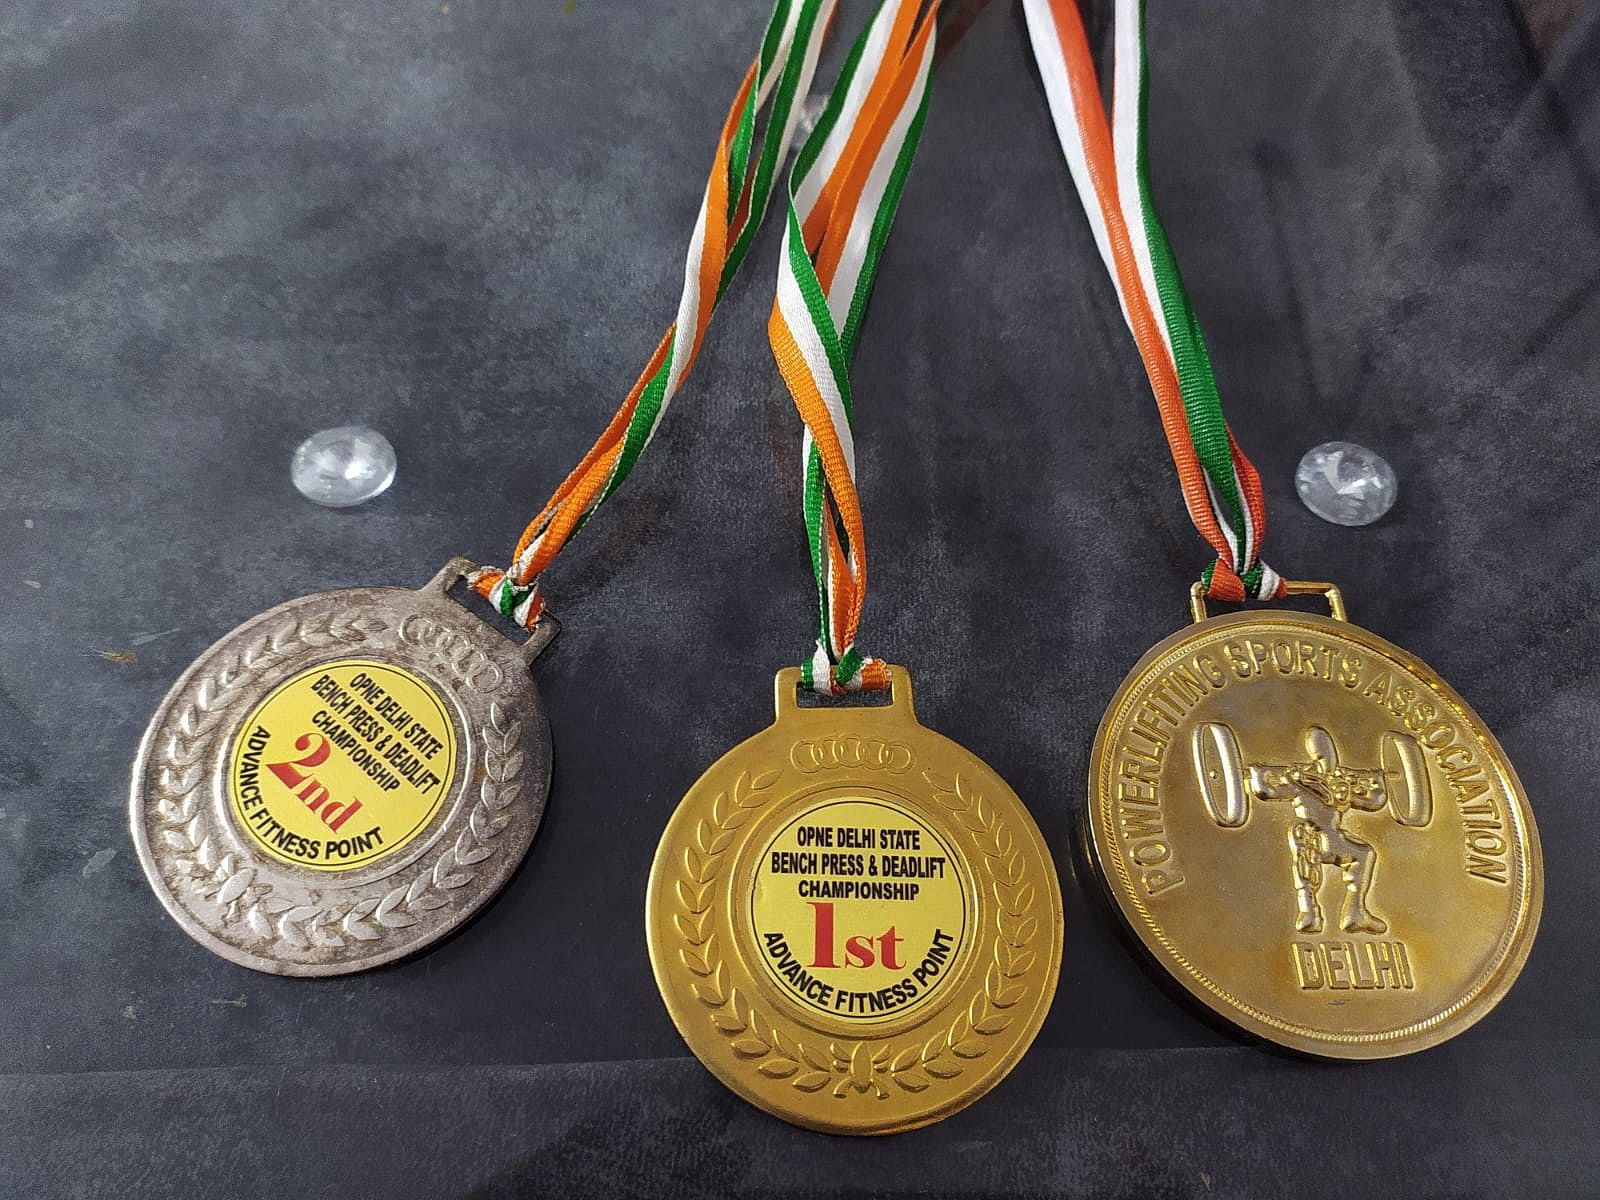 Sajar has won silver (left) and gold (centre) medals in local competitions, besides a gold medal (right) at Delhi’s State Sub-Junior Powerlifting Championship on 5 March | Photo: ThePrint